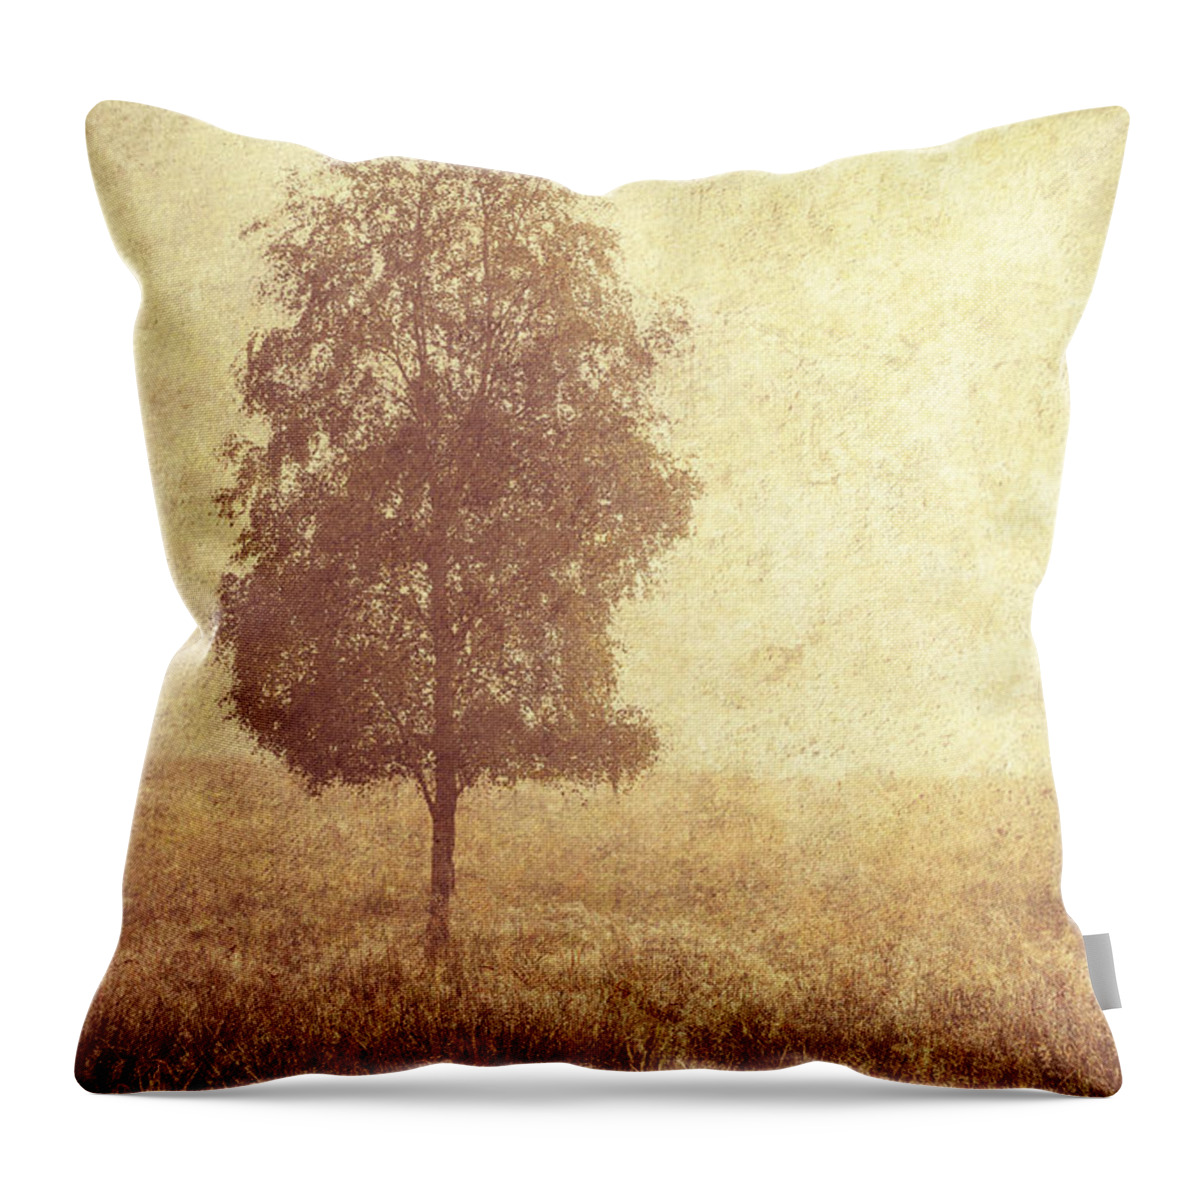 Scotland Throw Pillow featuring the photograph Lonely Tree. Trossachs National Park. Scotland by Jenny Rainbow